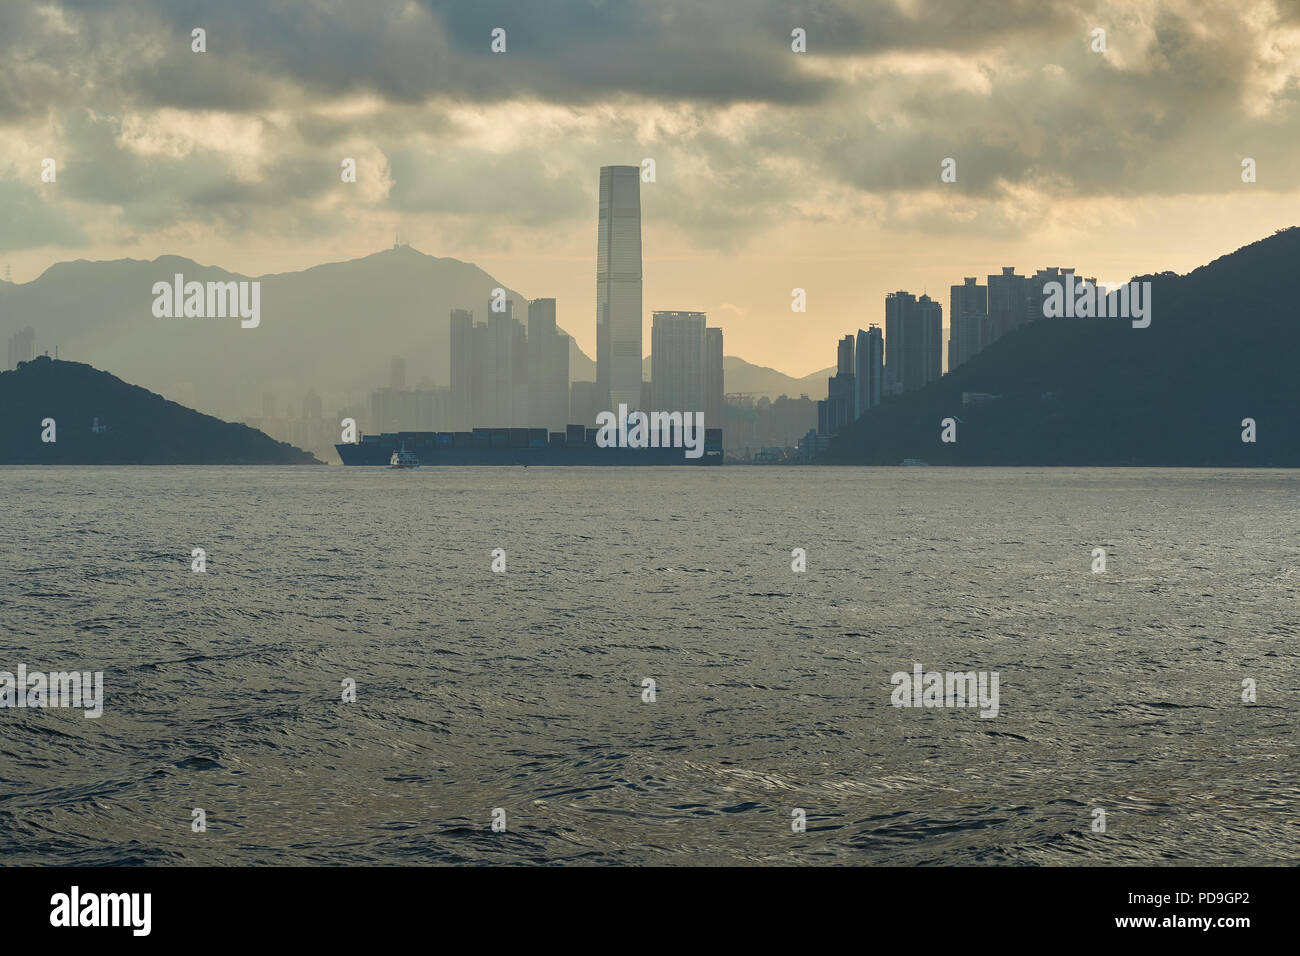 A Container Ship Passes In Front Of The Hong Kong Skyline As It Exits The East Lamma Shipping Channel And Head To Towards The Container Port. Stock Photo